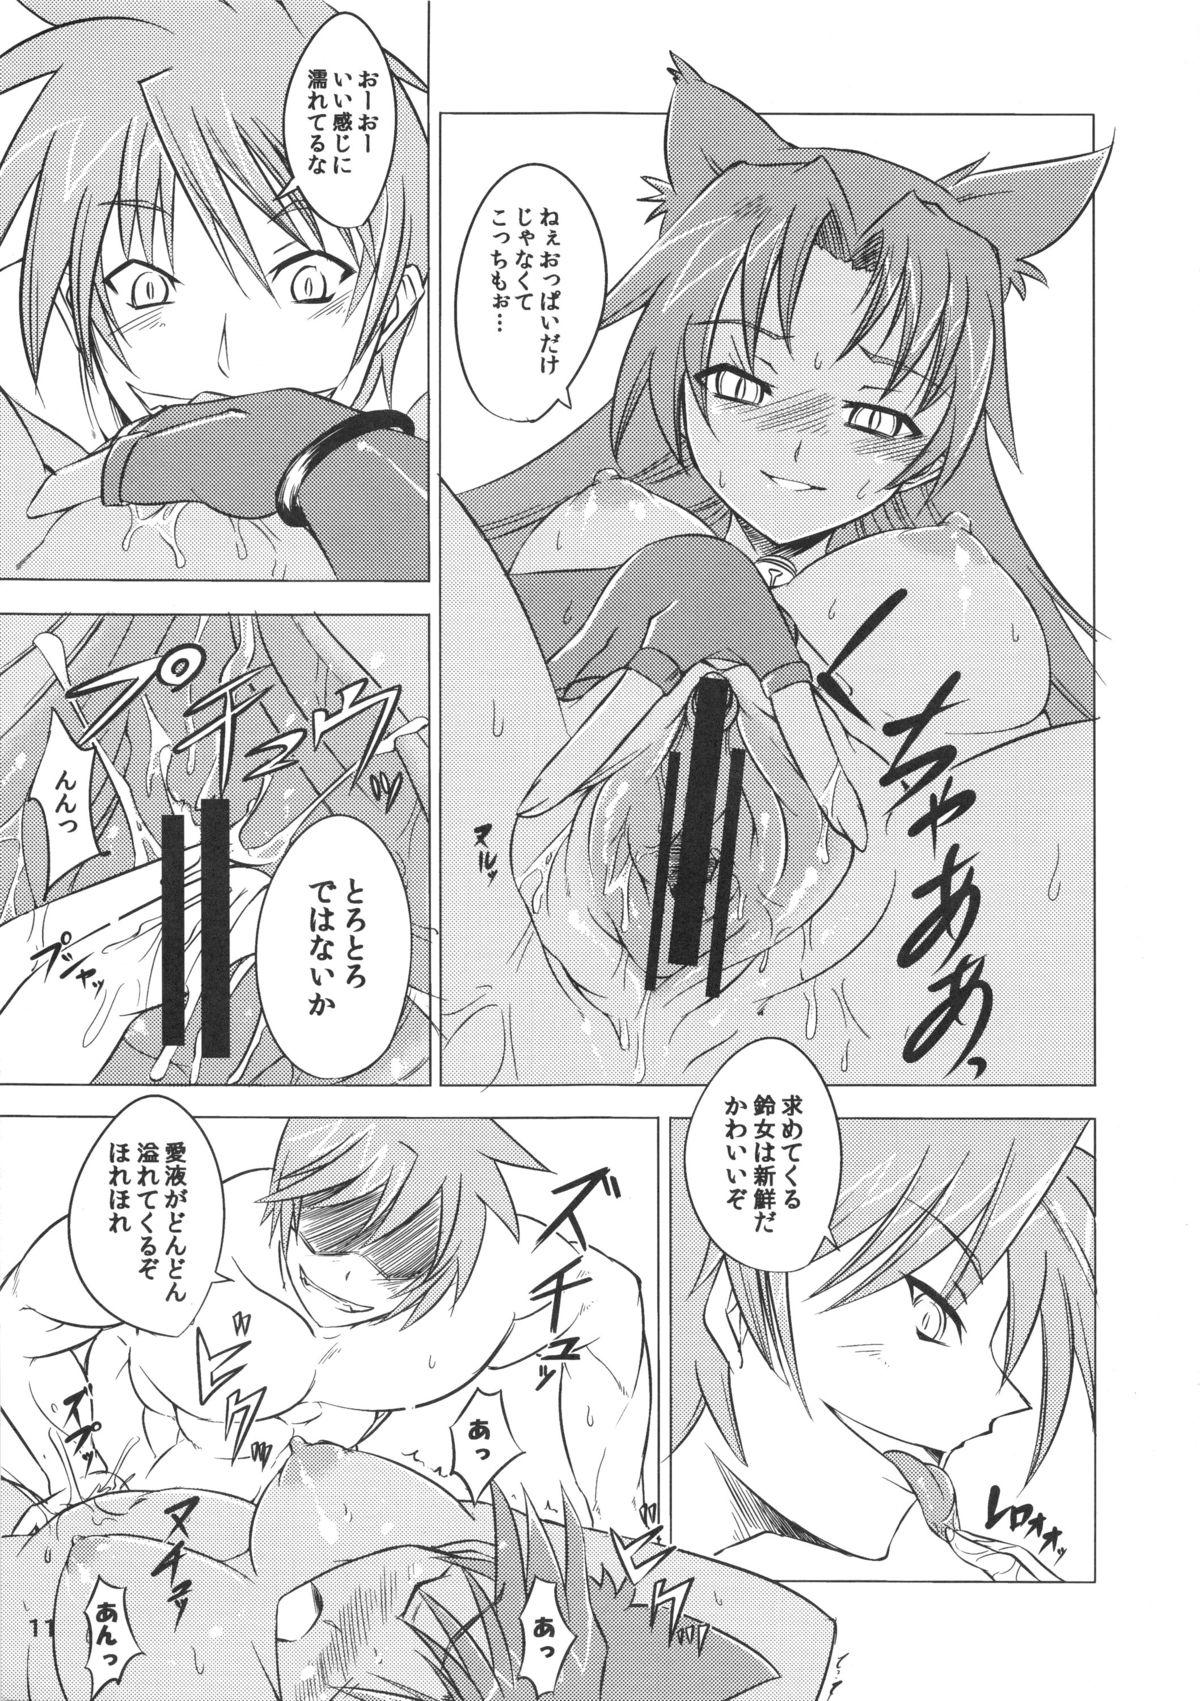 Best Blowjob Ever Suzume no Namida. - Rance Uncensored - Page 11